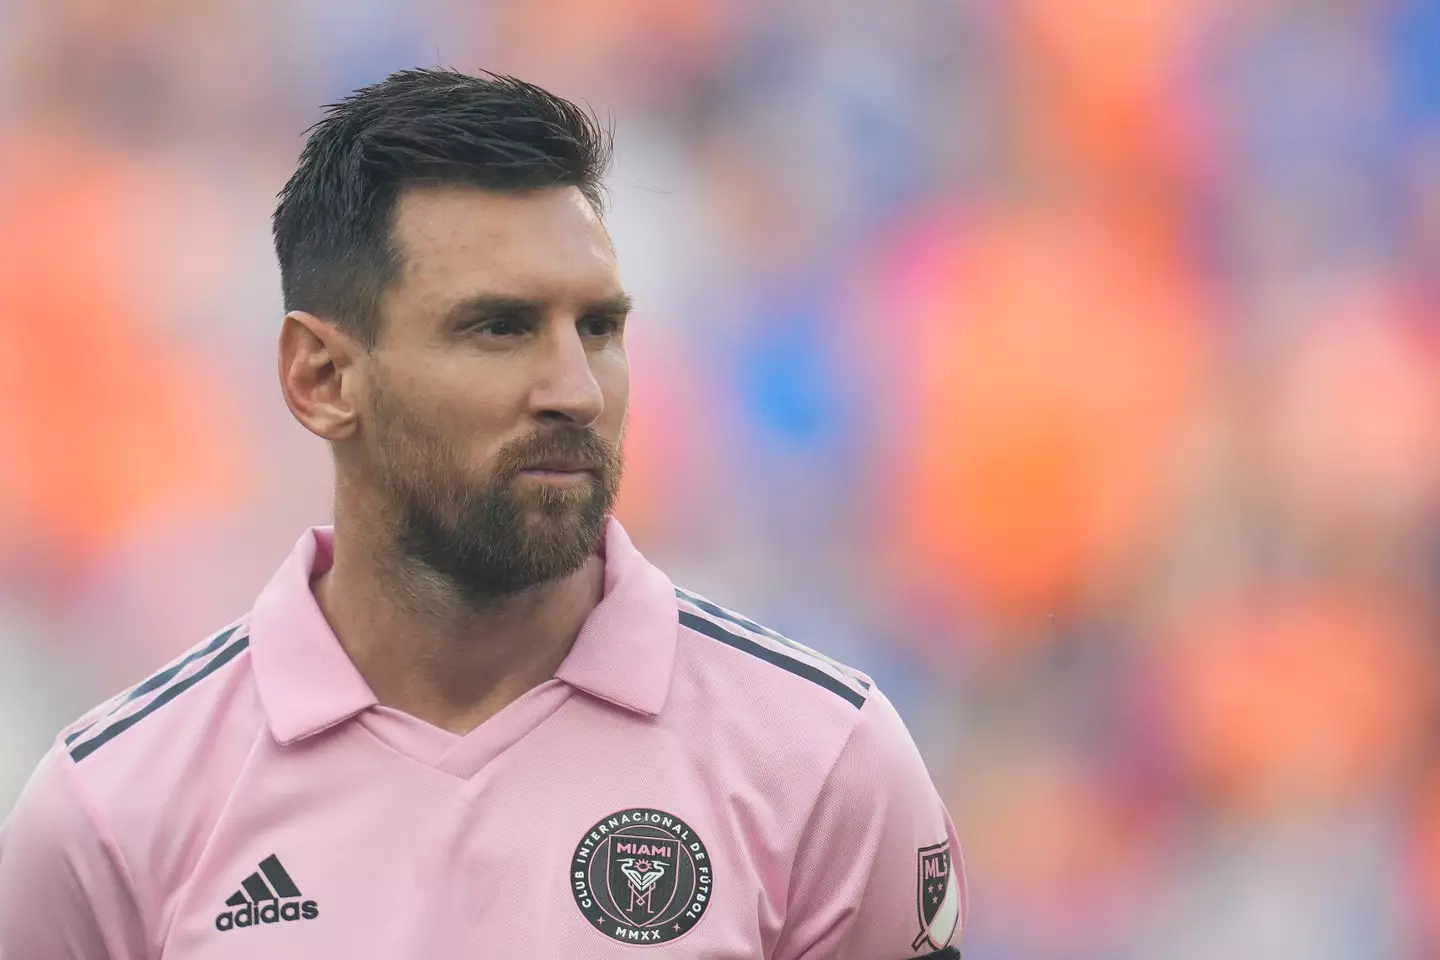 Lionel Messi has reached his second final since joining MLS side Inter Miami. (